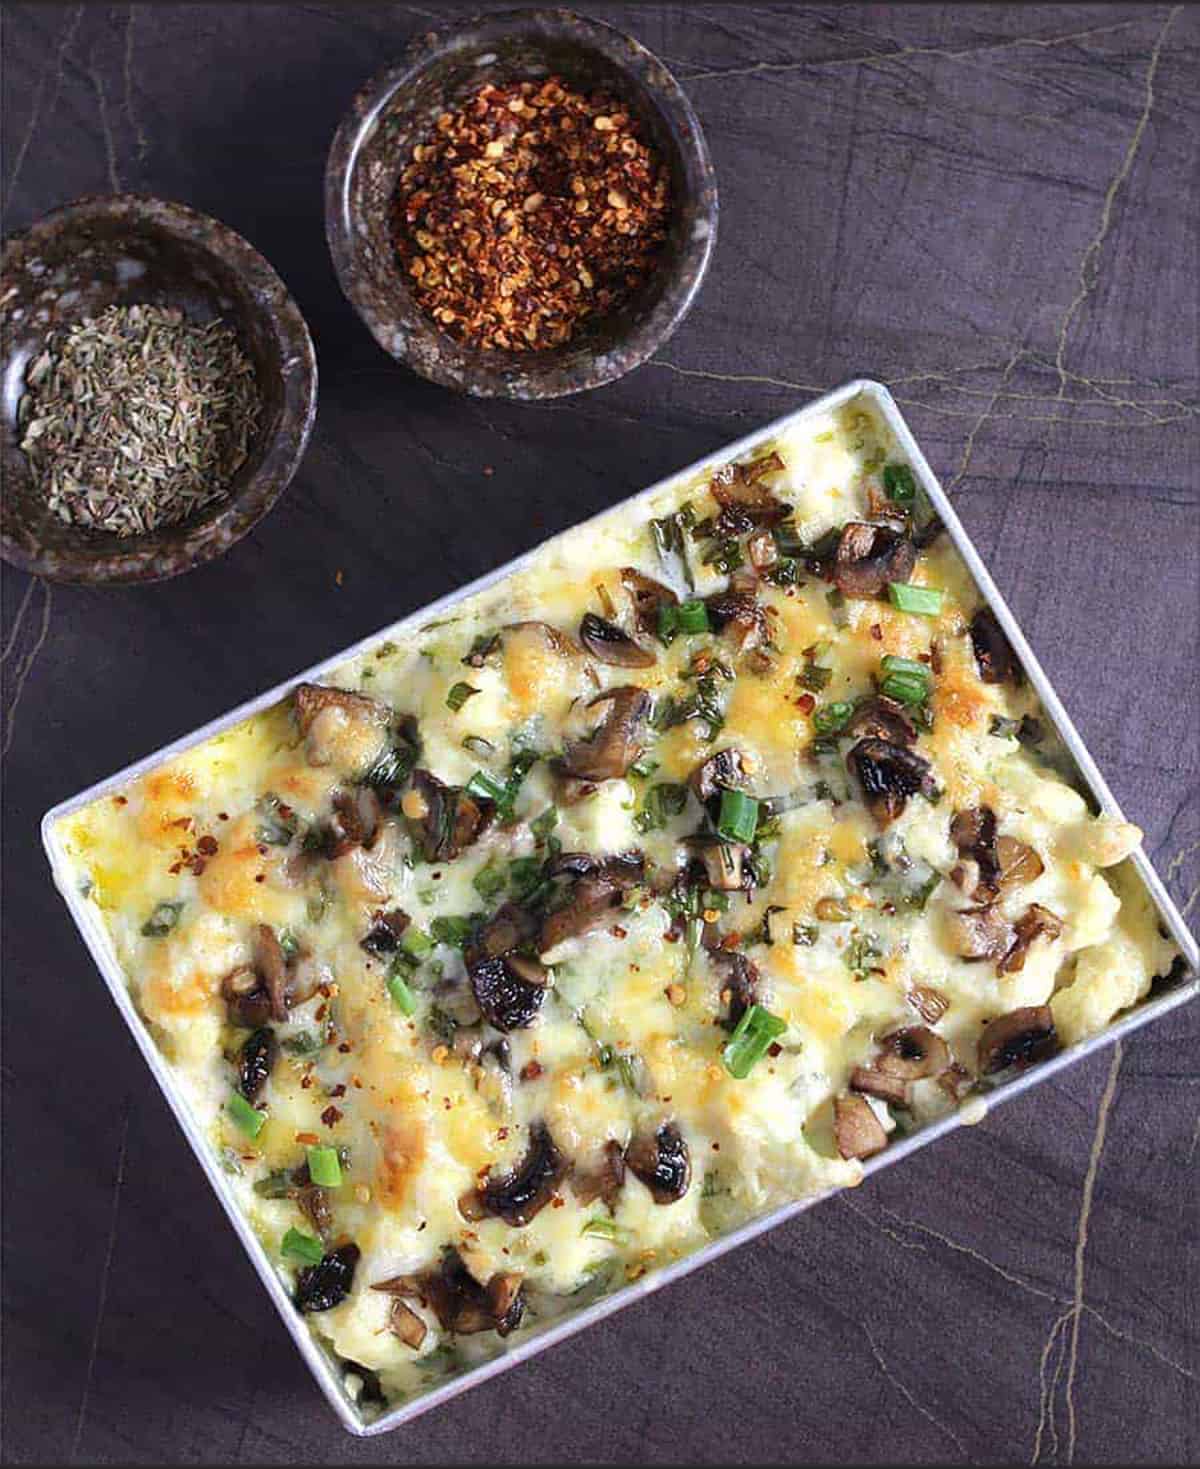 Top view of creamy and cheesy loaded cauliflower casserole with sauteed mushrooms.